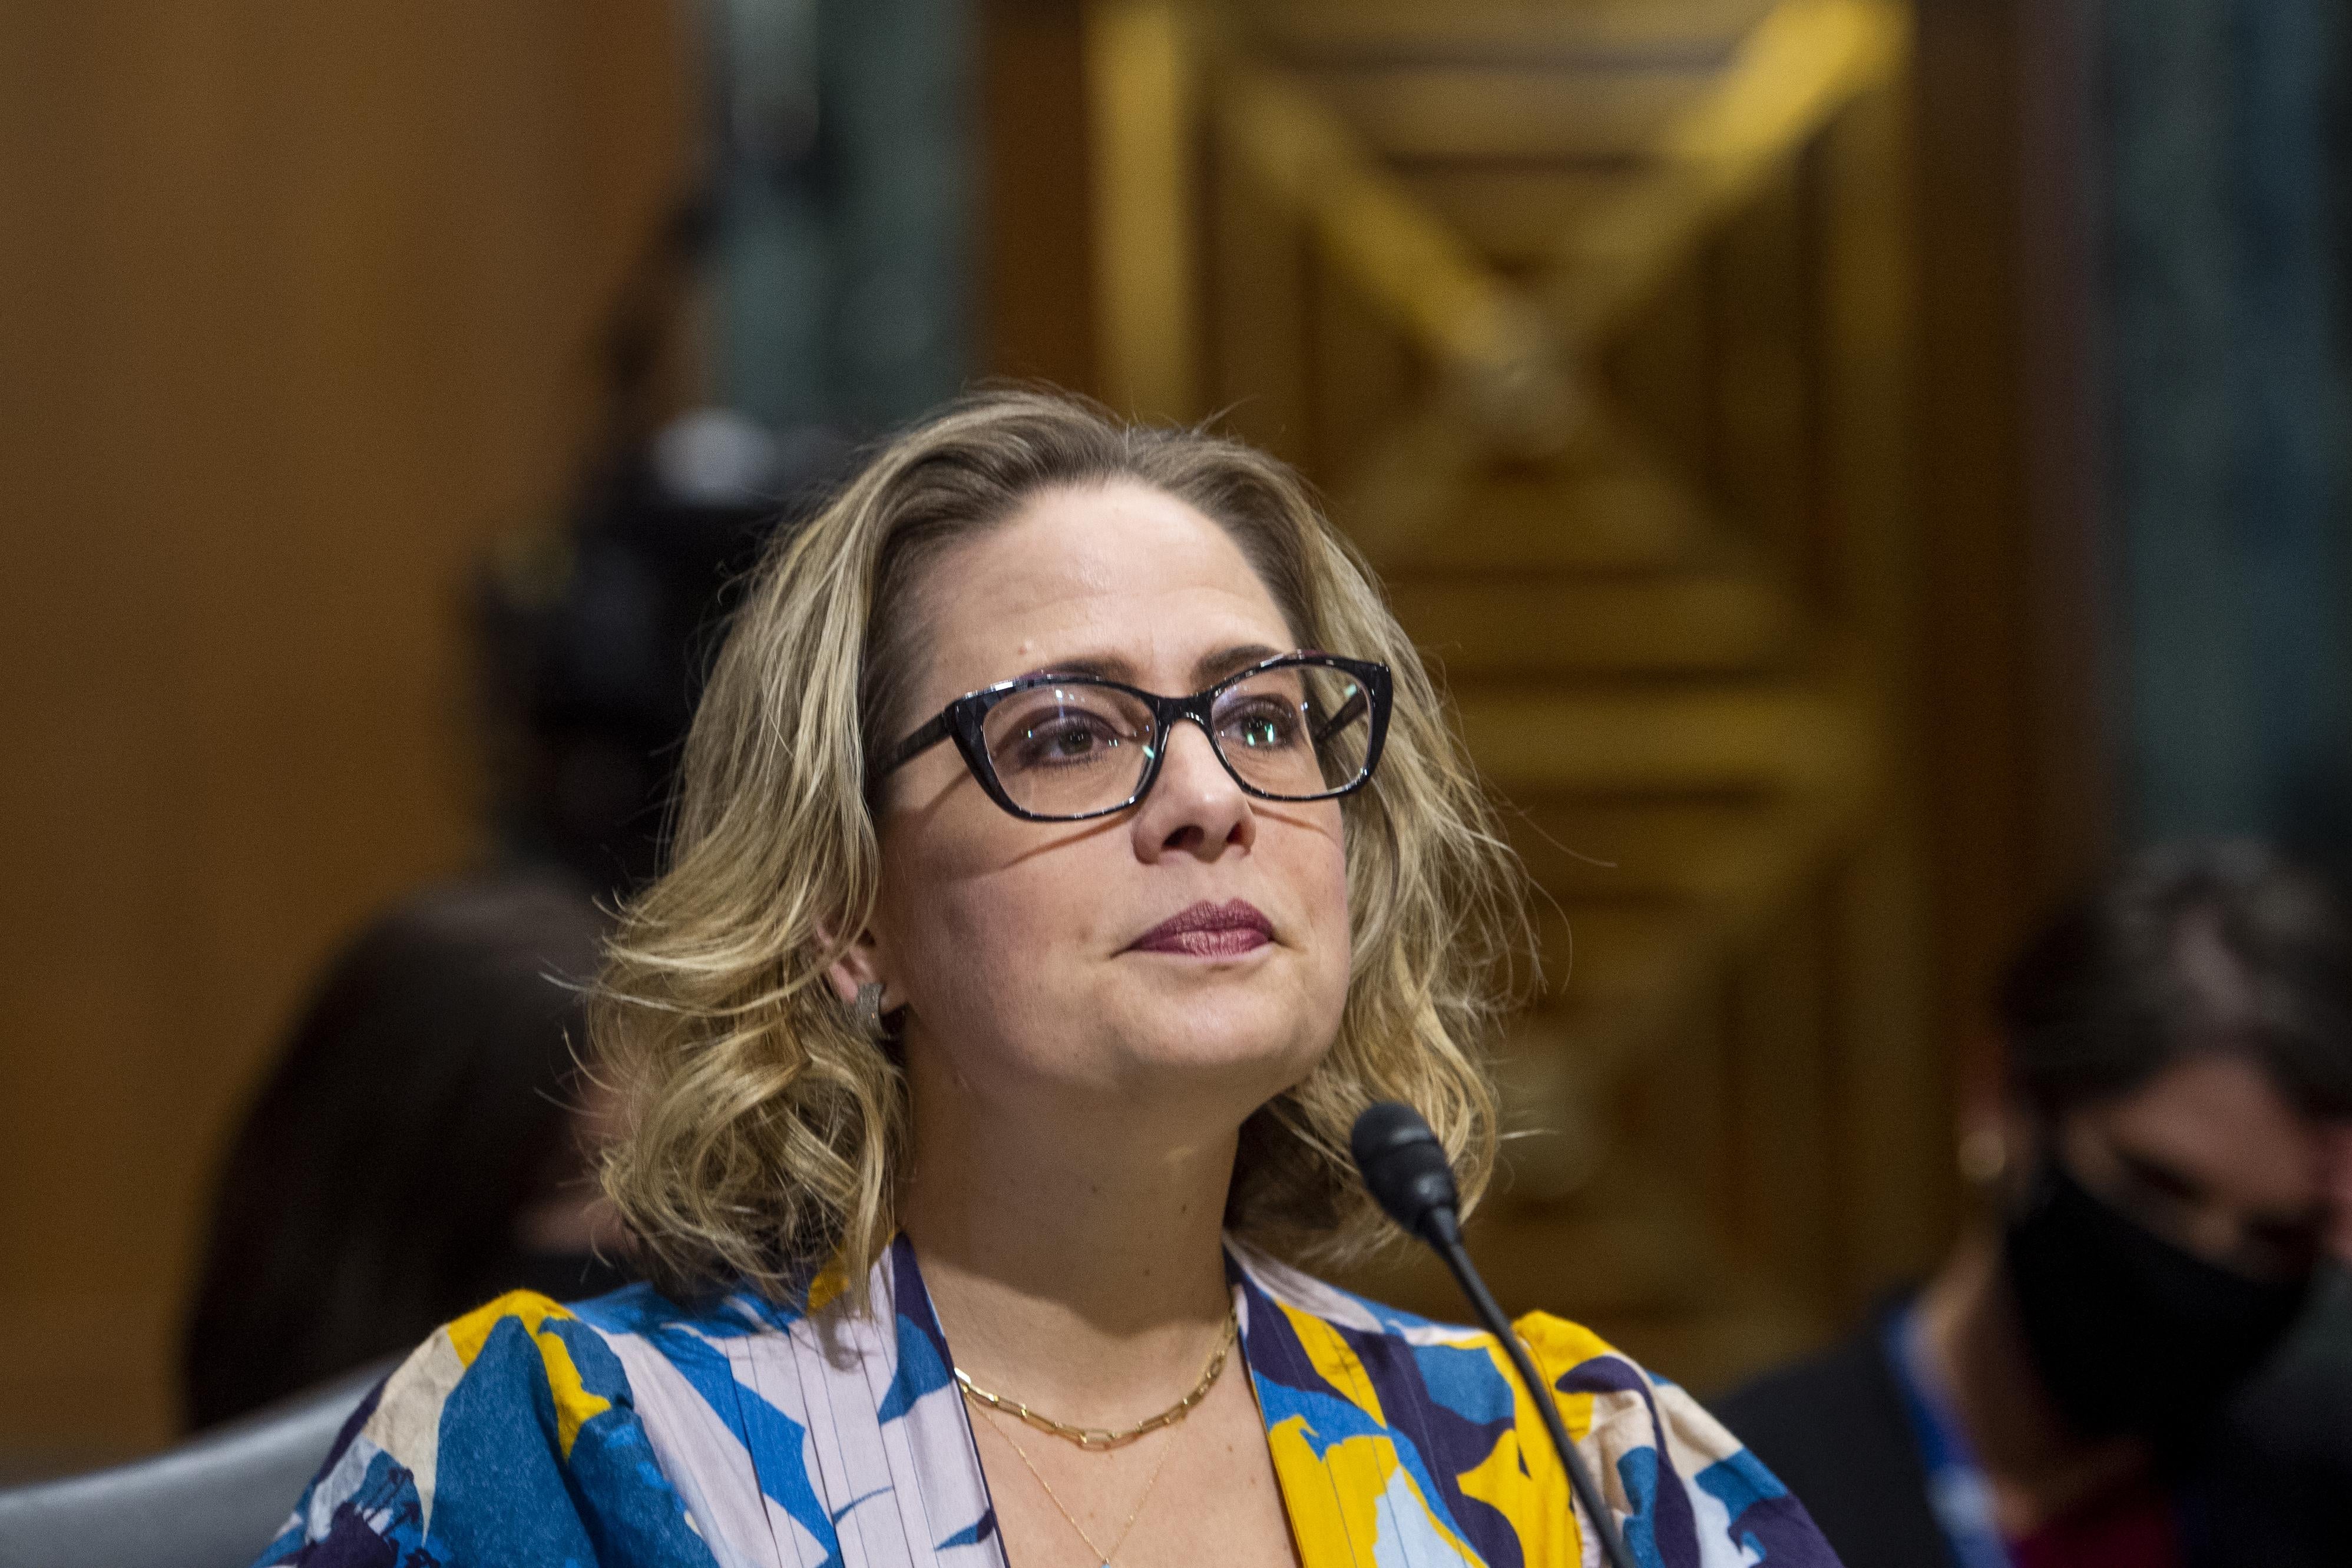 Kyrsten Sinema purses her lips while sitting in front of a mic in a hearing room